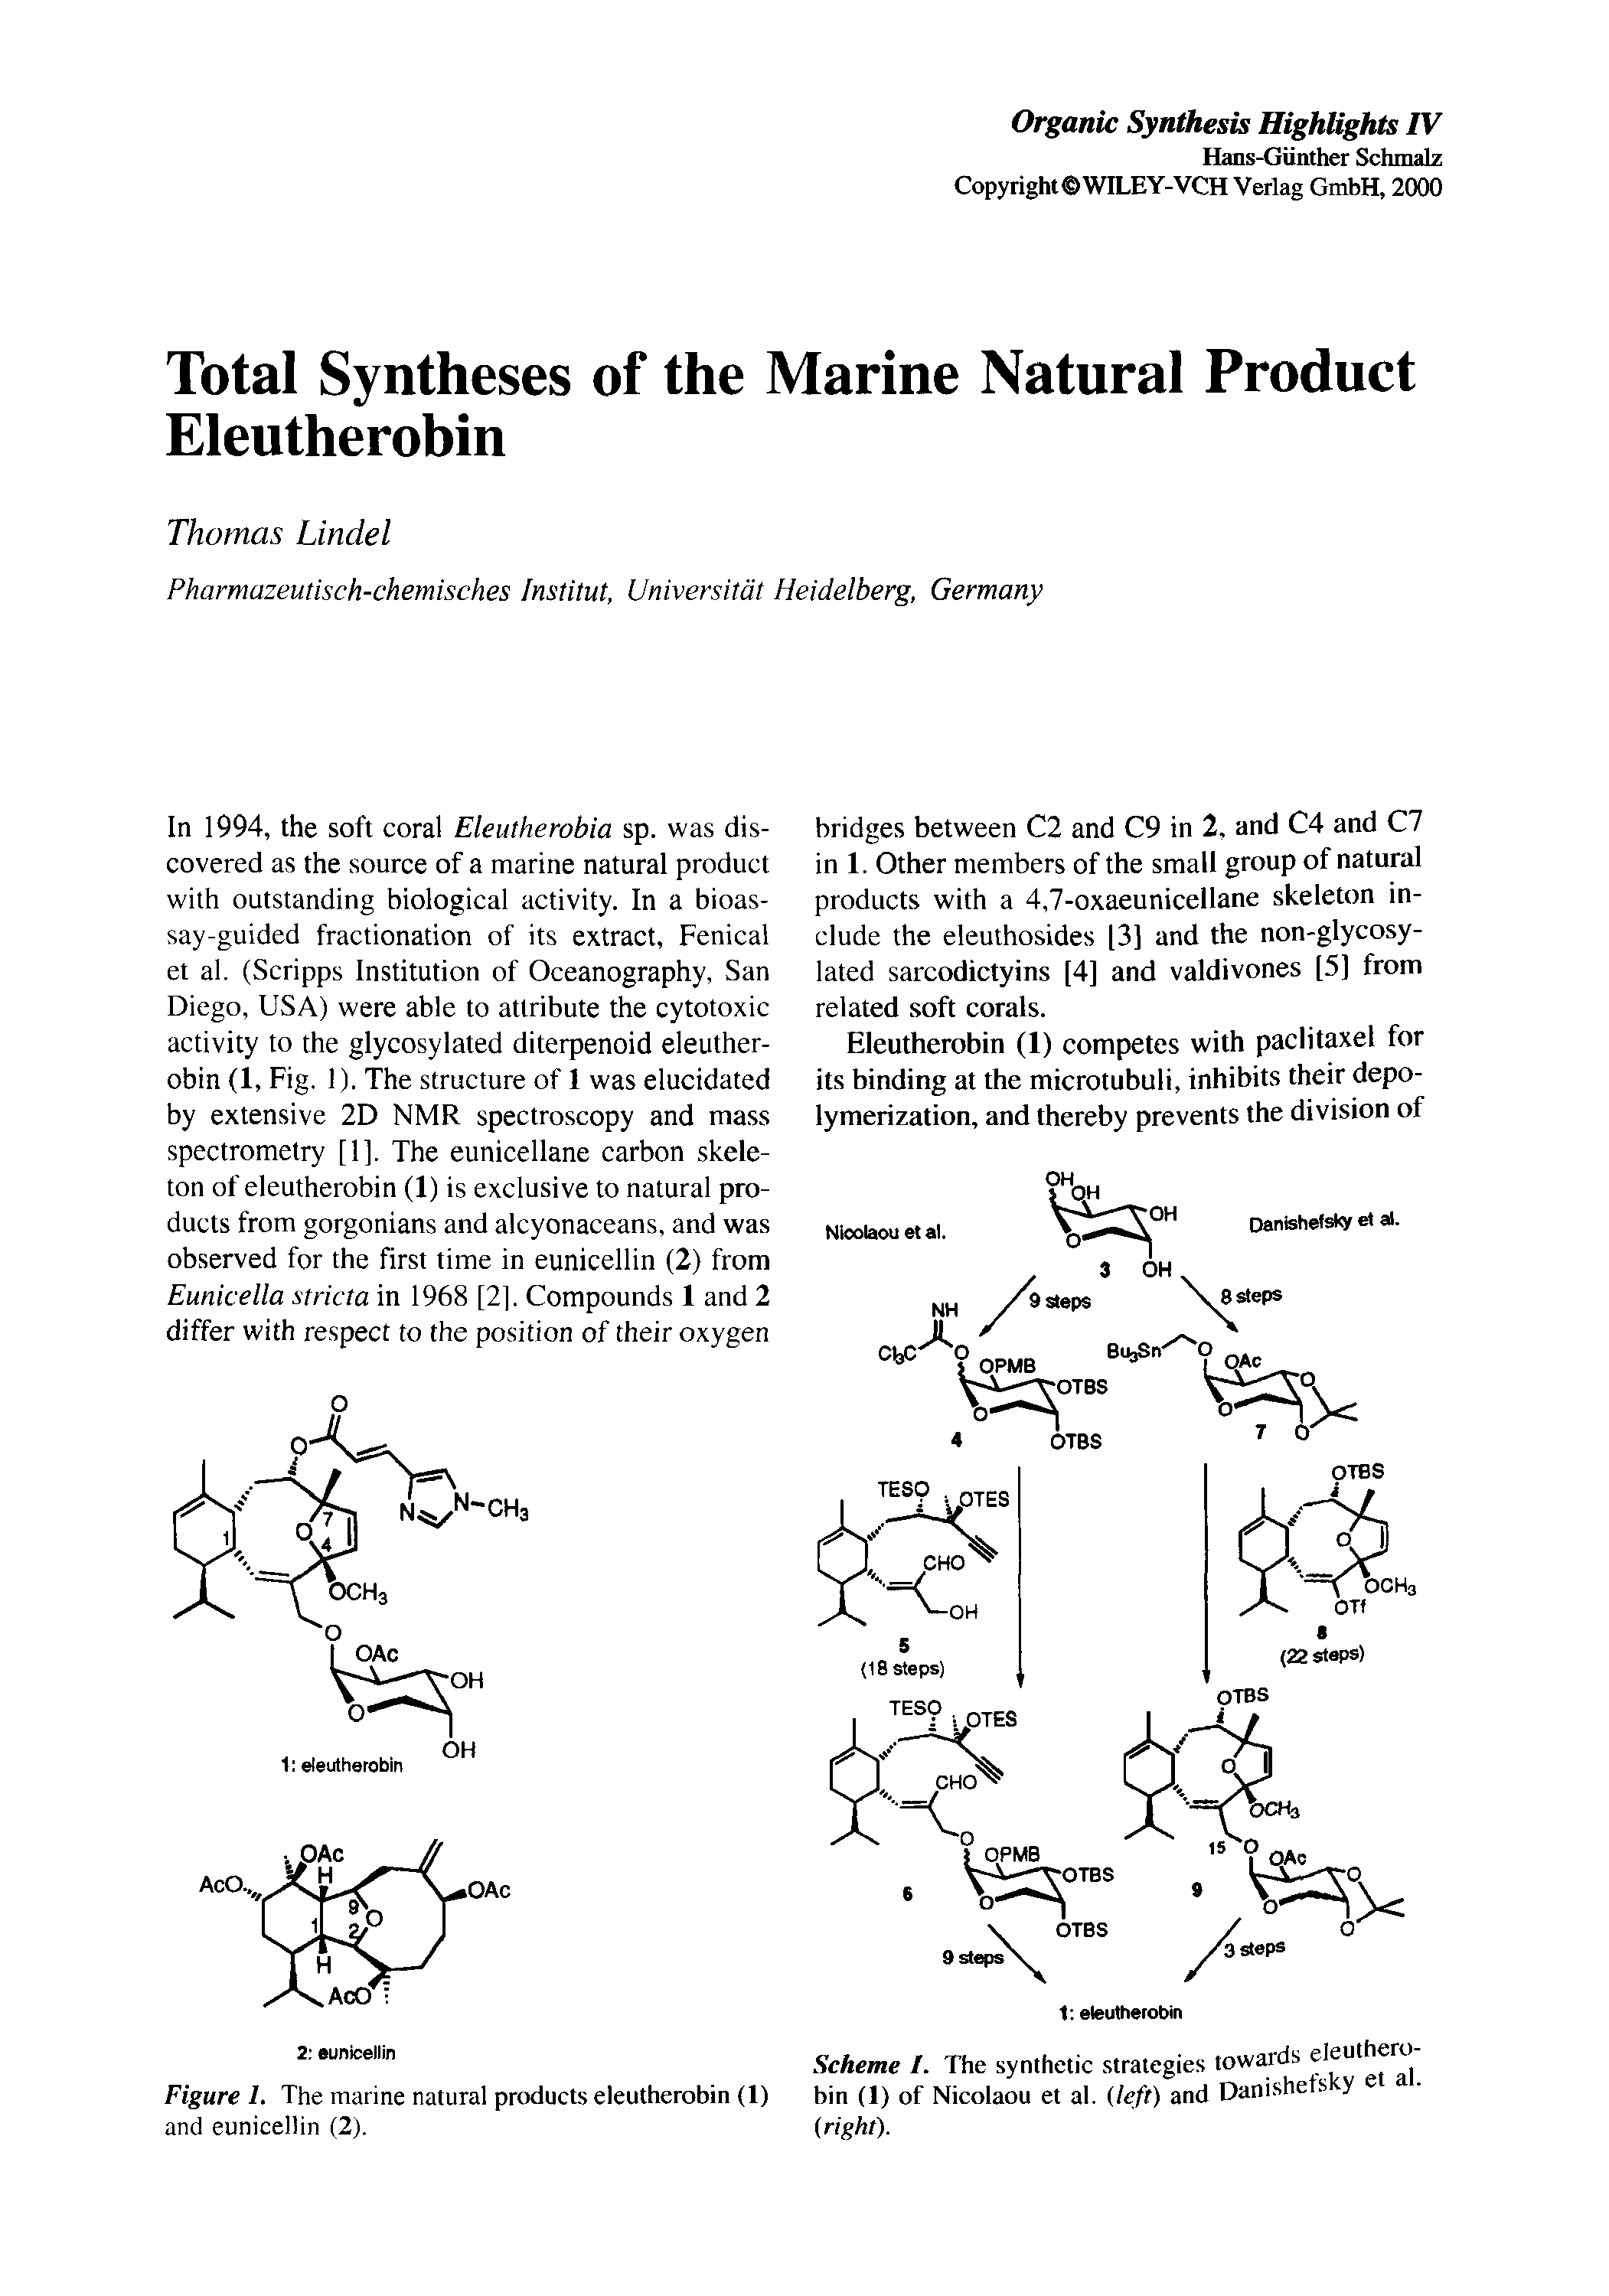 Figure I. The marine natural products eleutherobin (1) and eunicellin (2).